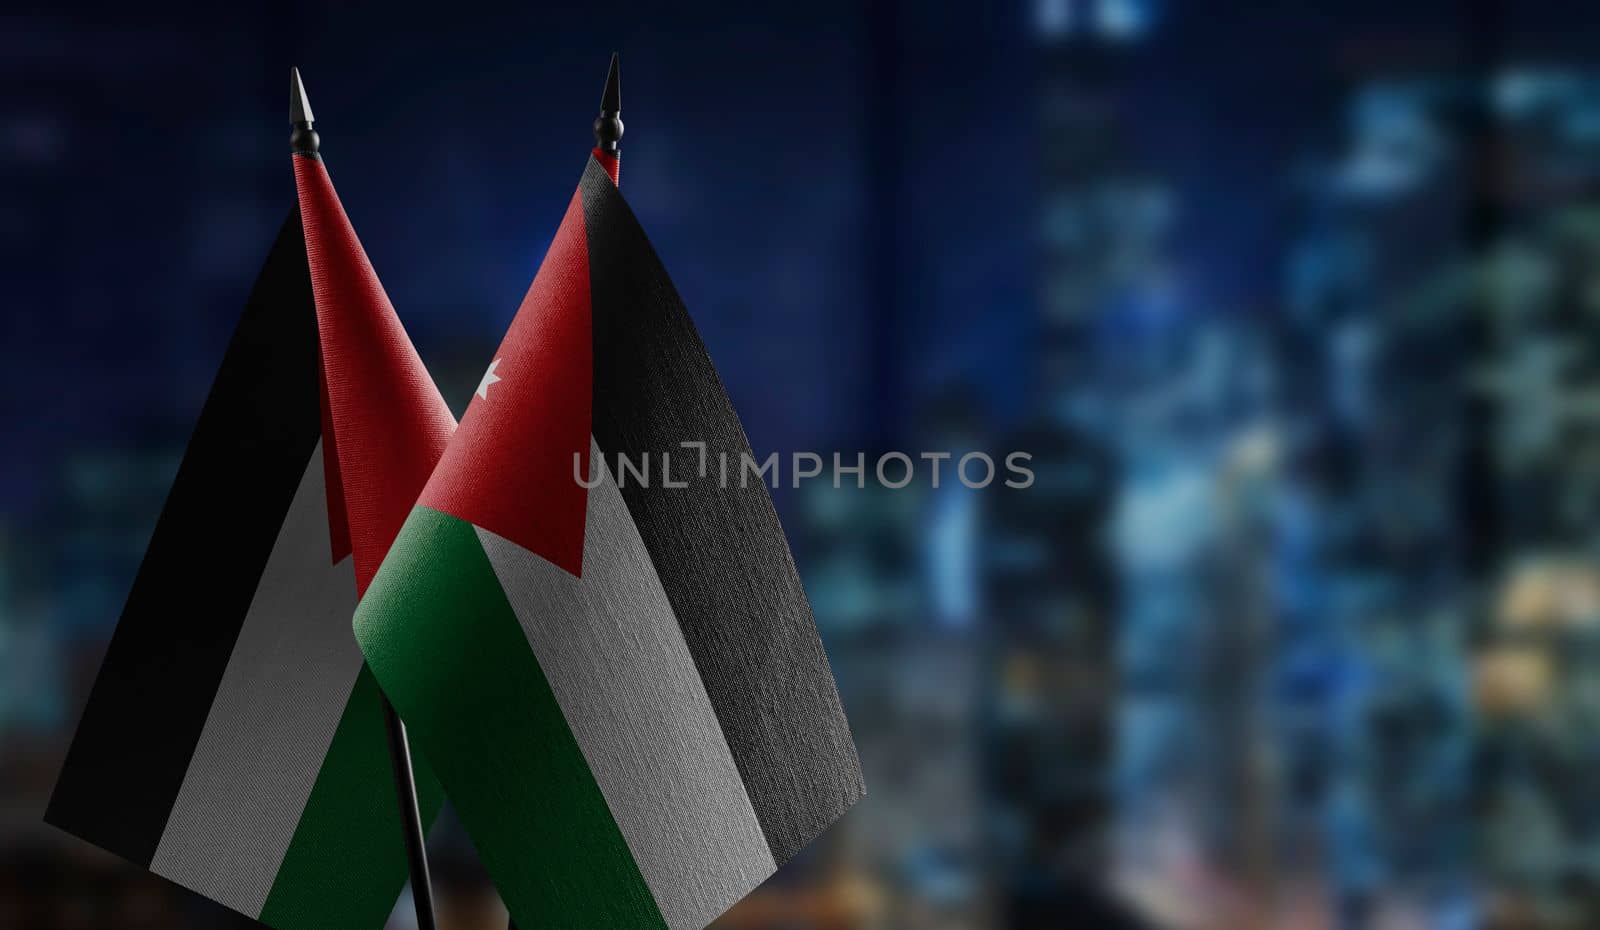 Small flags of the Jordan on an abstract blurry background.